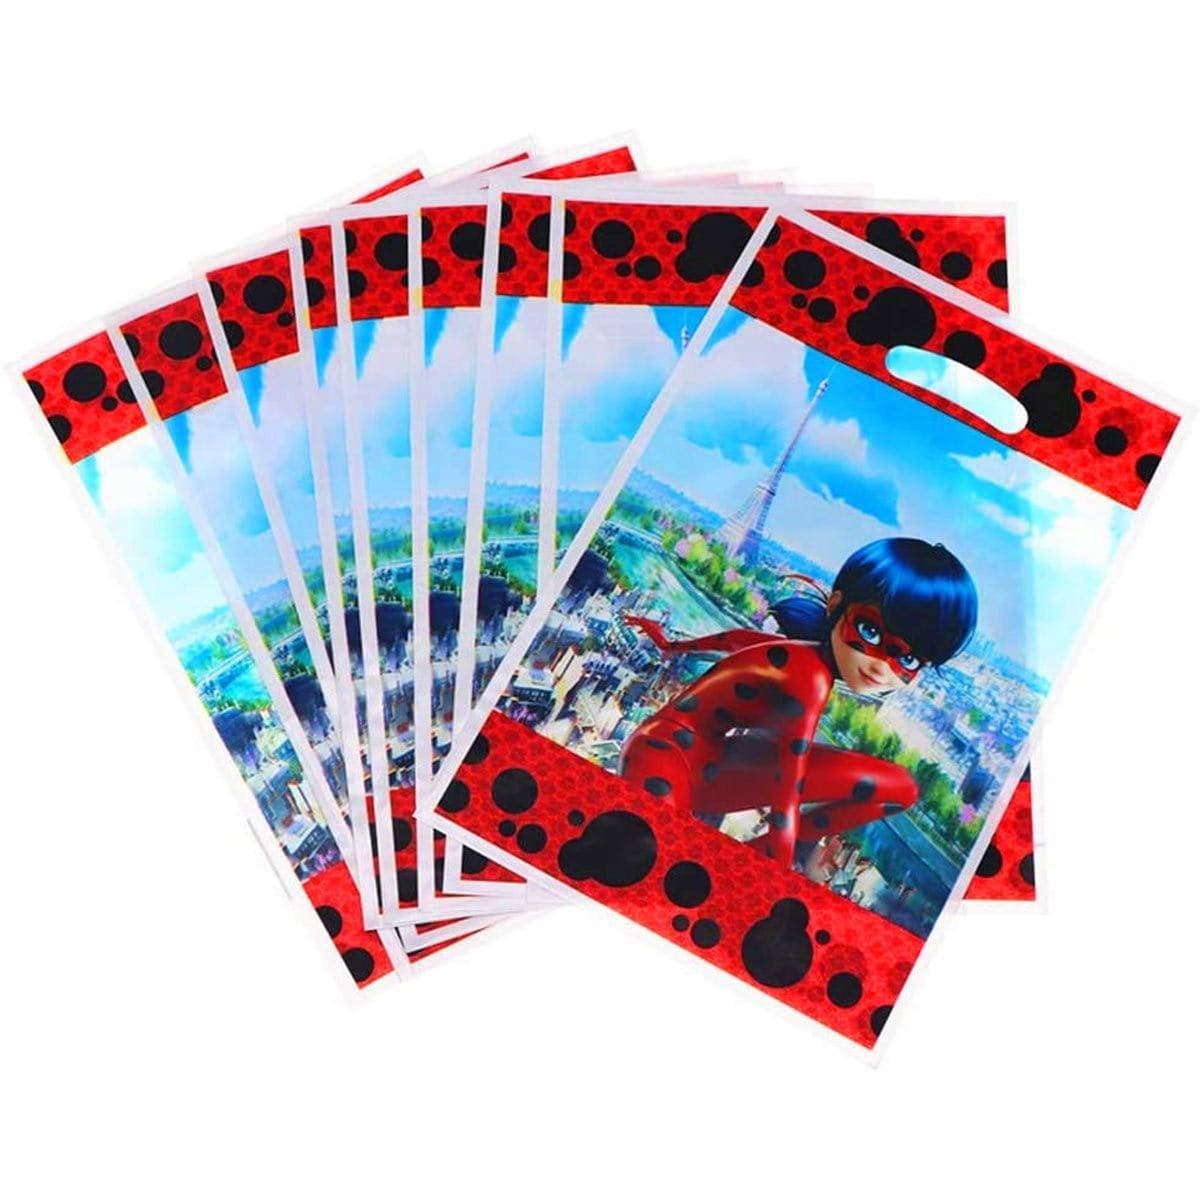 Buy Kids Birthday Miraculous: Tales of Ladybug & Cat Noir Loot Bag, 10 Count sold at Party Expert